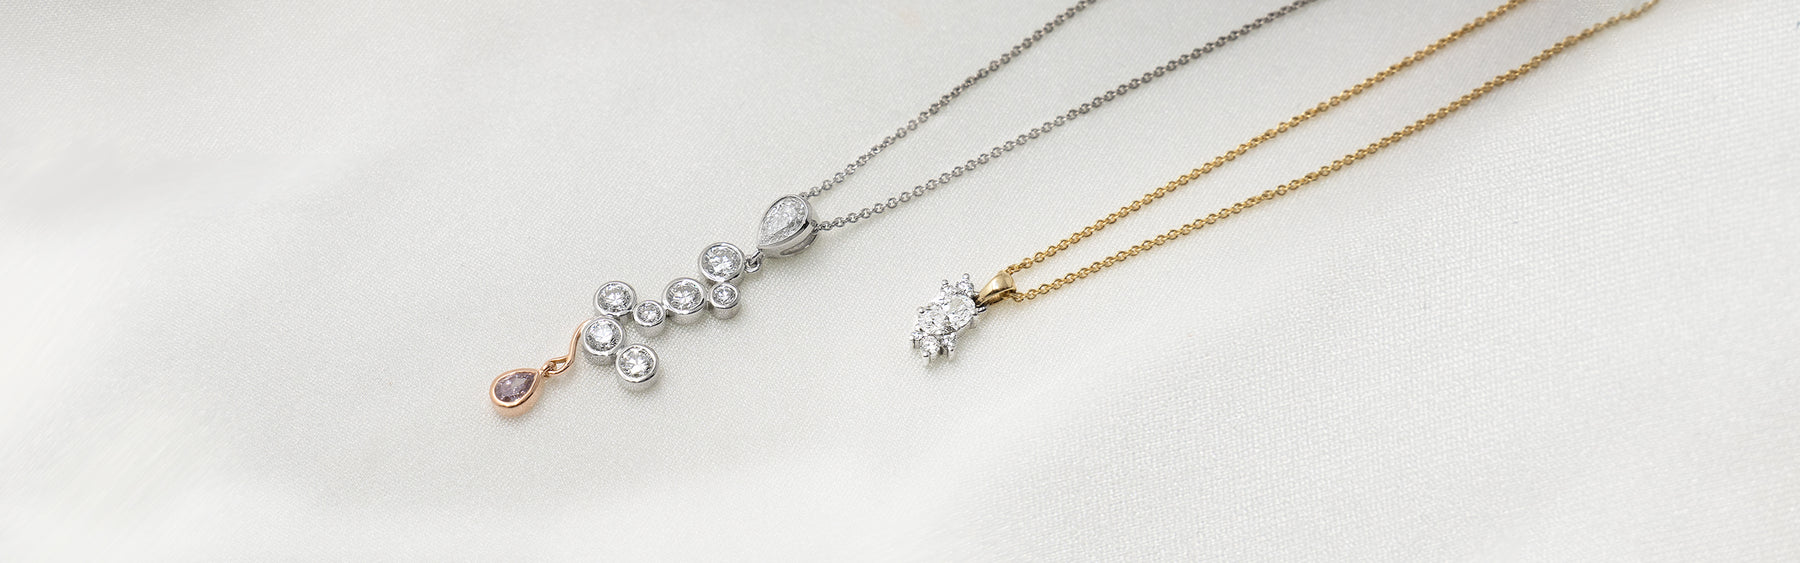 Ready to Ship Custom Designer Diamond Pendants and Necklaces made by The Village Goldsmith